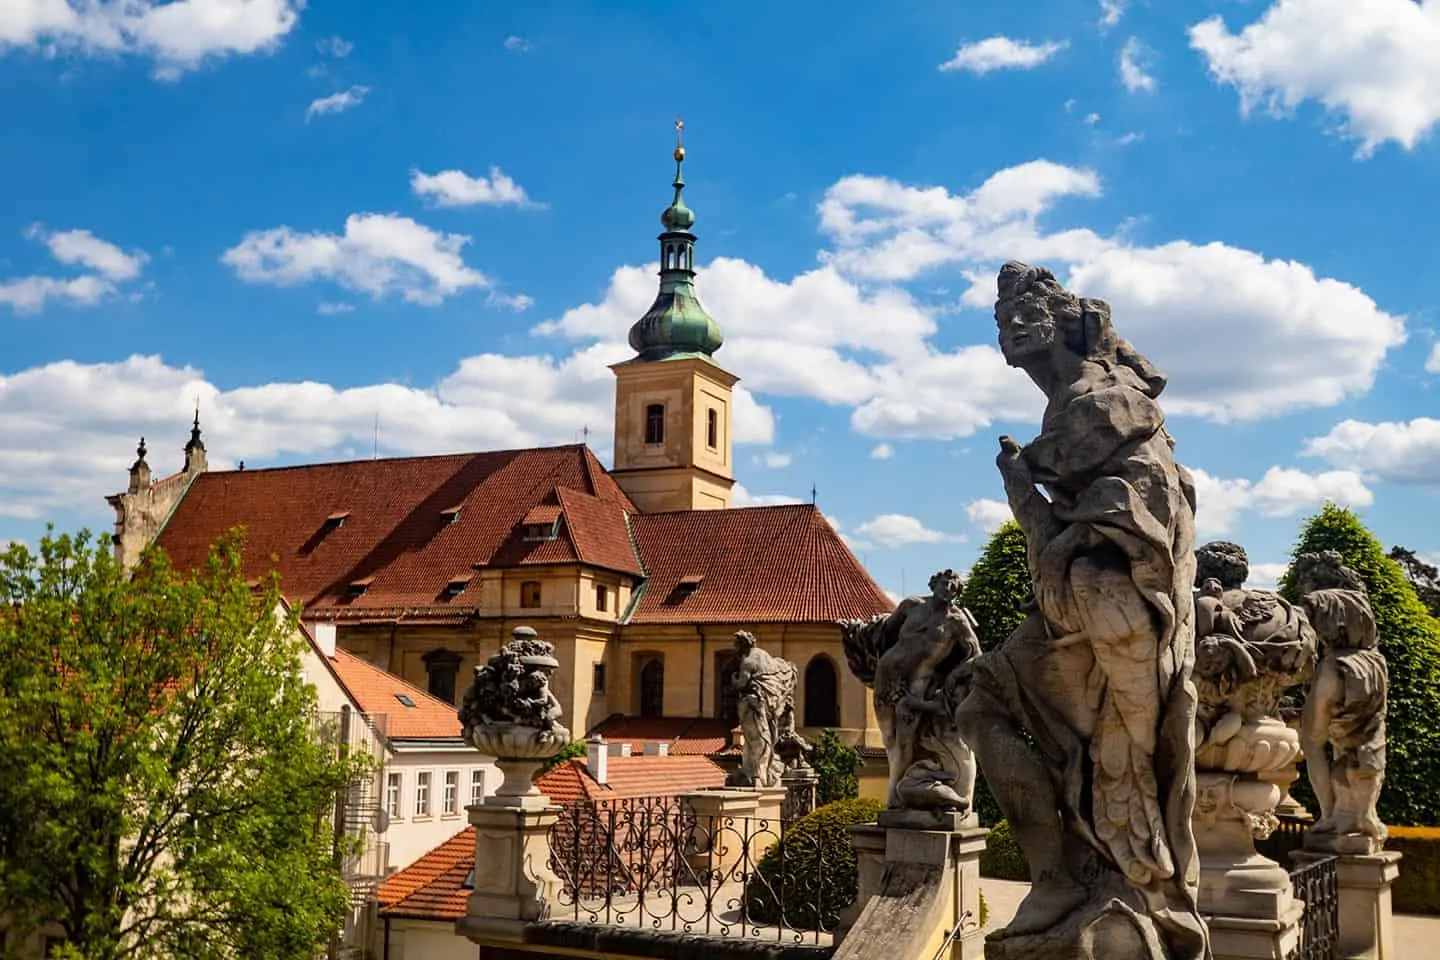 Journey through time at the Church of Our Lady Victorious, an outdoor escape game unveiling Prague's rich religious history.